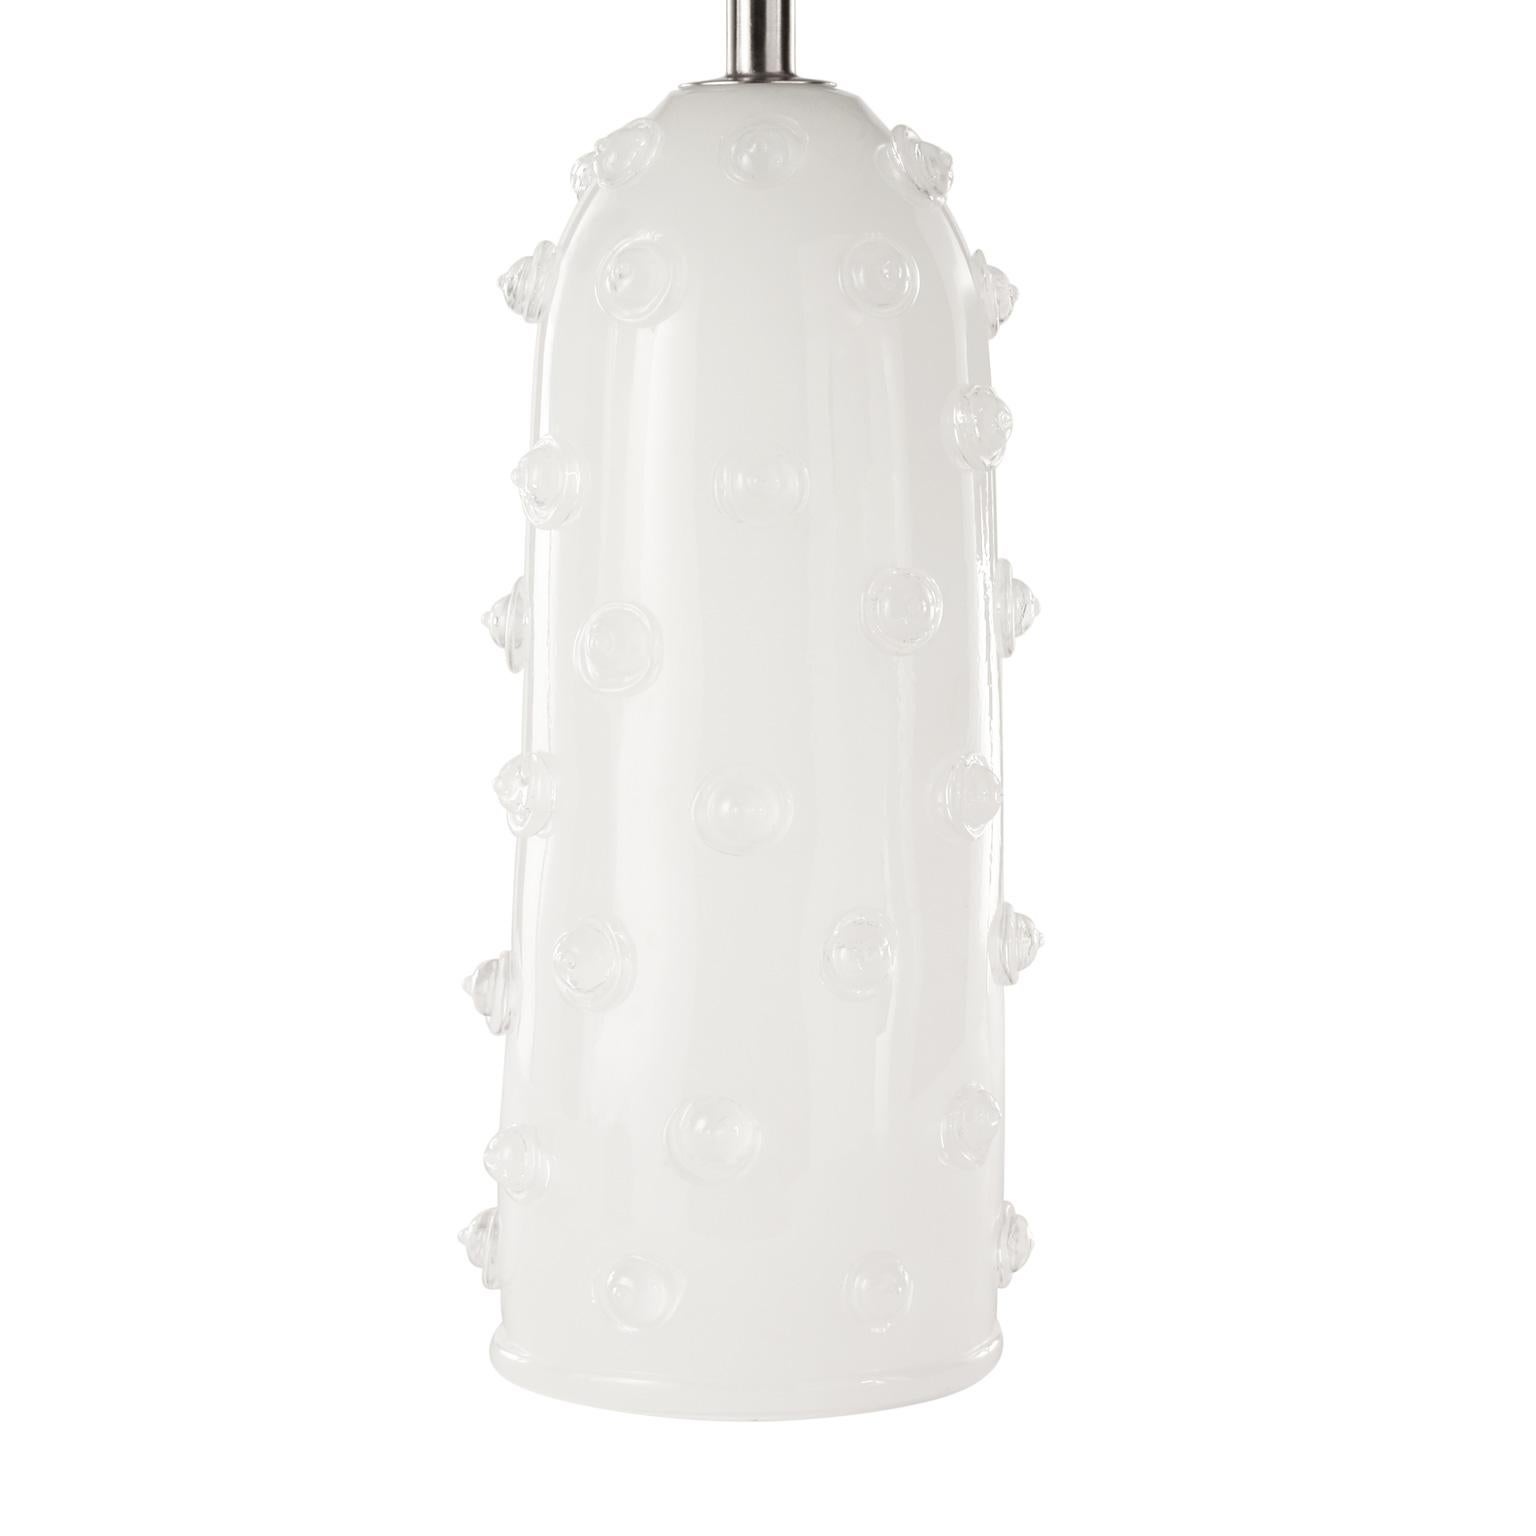 Table lamp silk artistic Murano glass, clear “Borchie”(particular application in glass on the base), grey organza lampshade. Nickel fixture.
The handcrafted soul of our lighting products is reinvented every time we start a new project, when we are